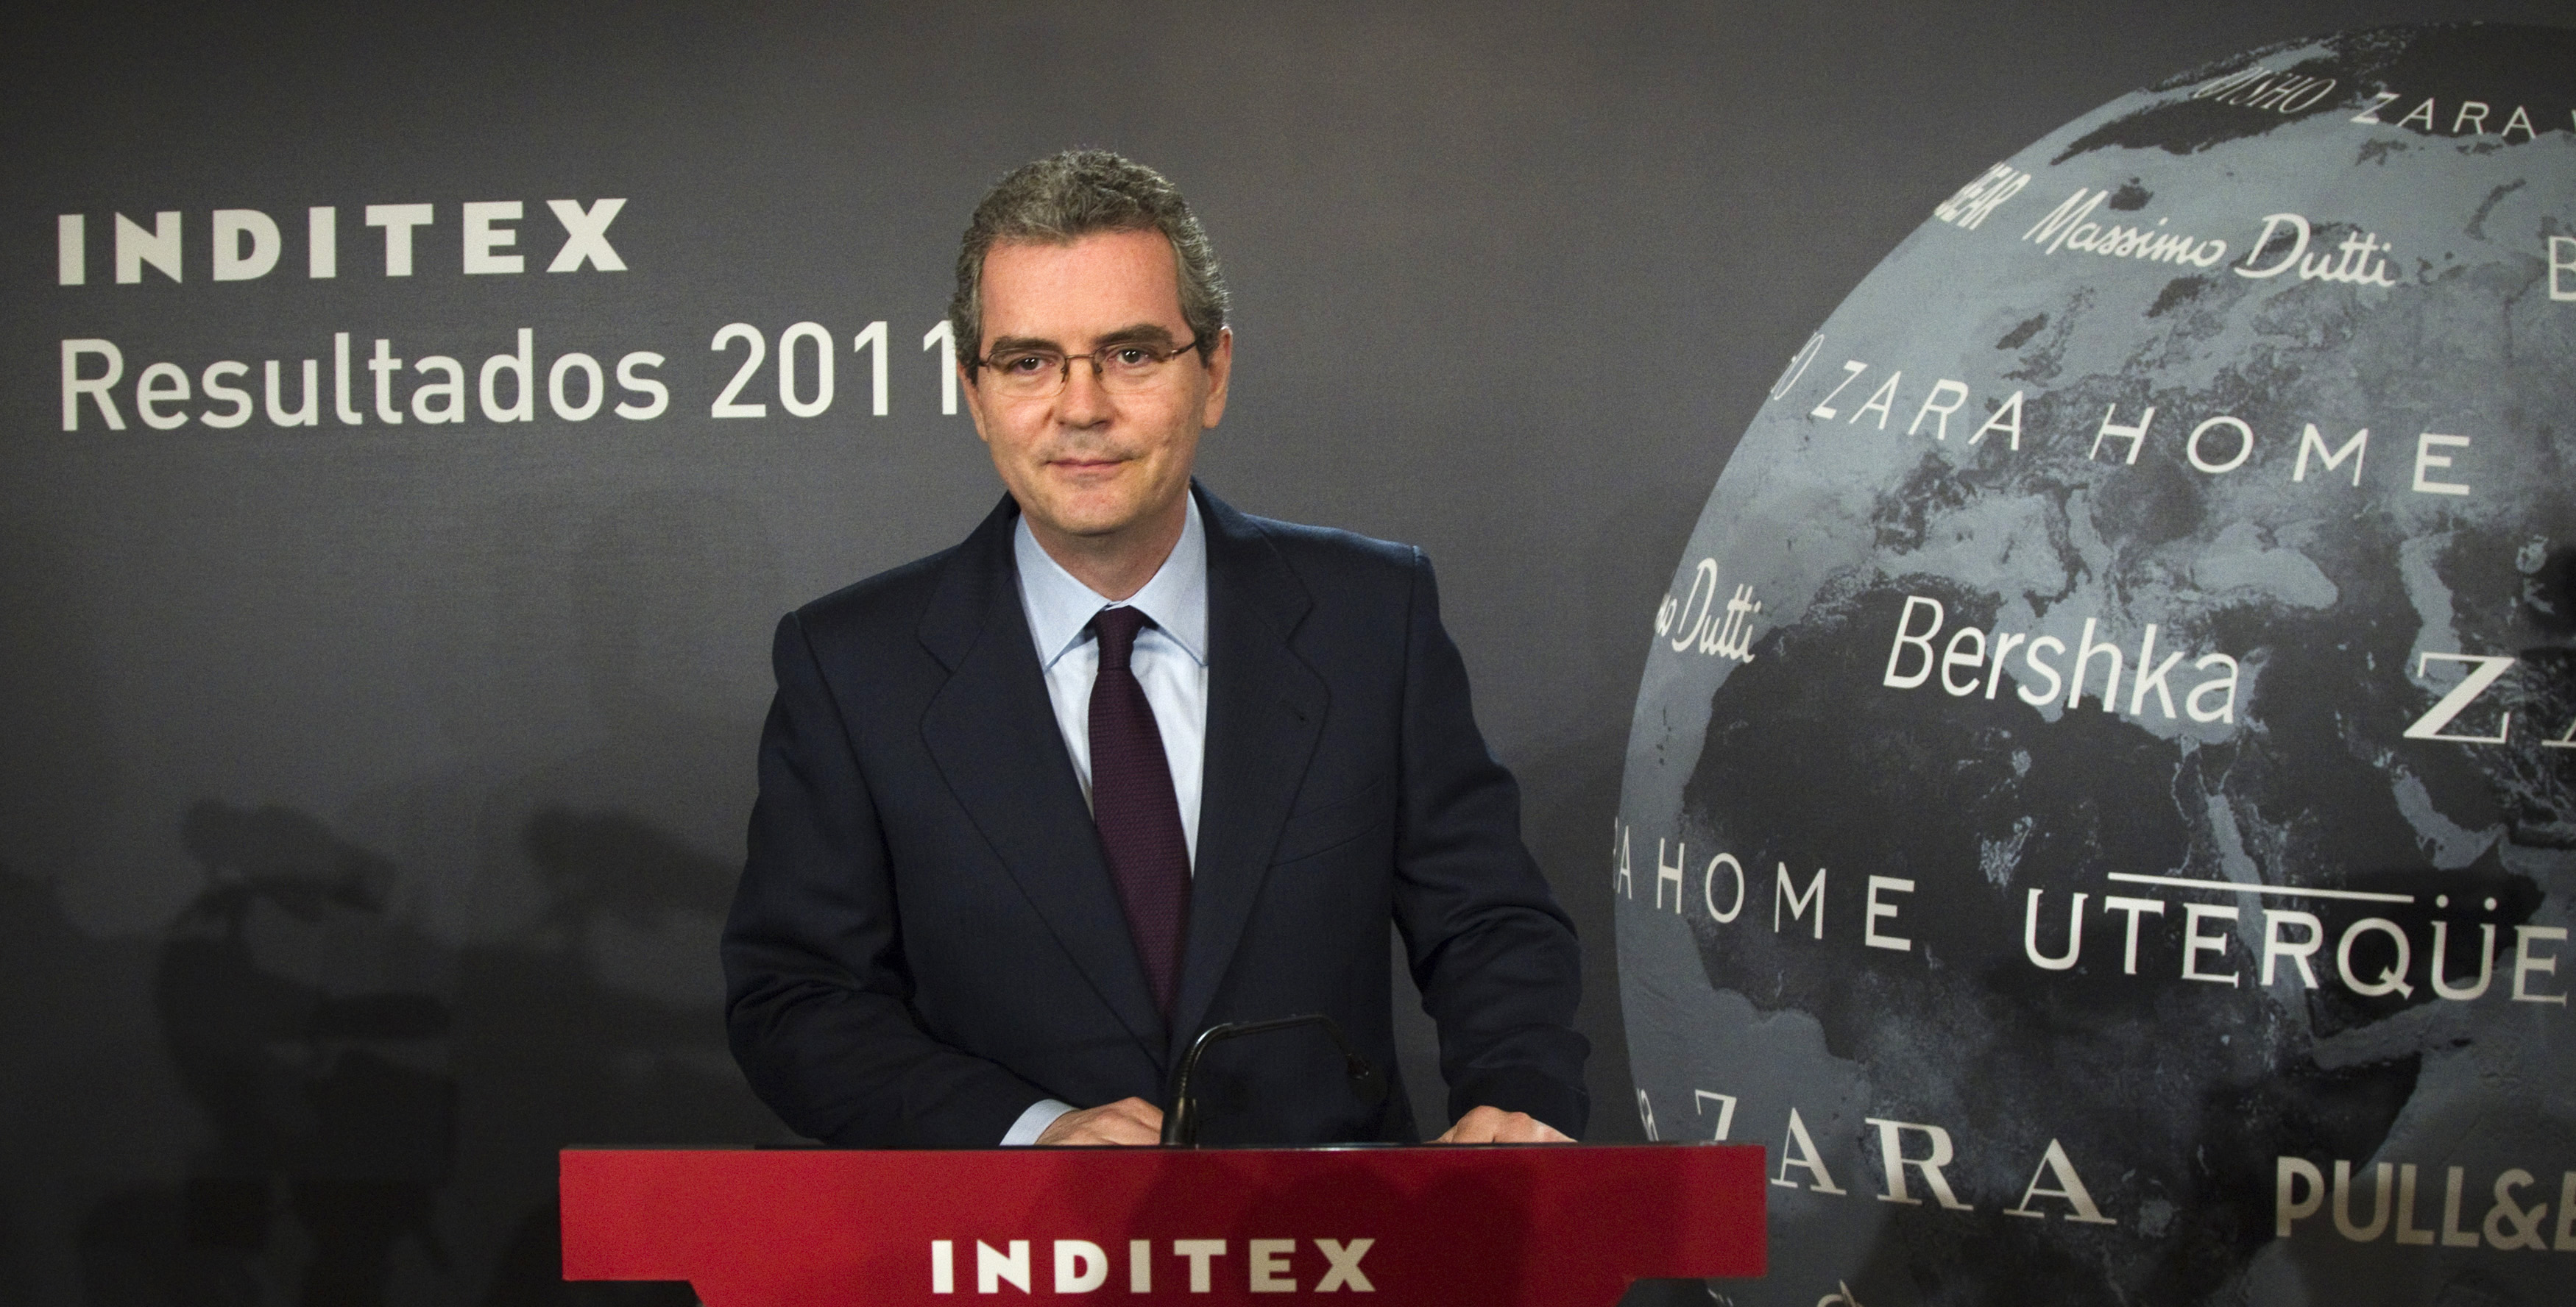 Pablo Isla, Chief Executive Officer of Spanish group Inditex, stands at the start of a news conference to present the company's 2011 annual results in Madrid March 21, 2012. REUTERS/Sergio Perez/File Photo